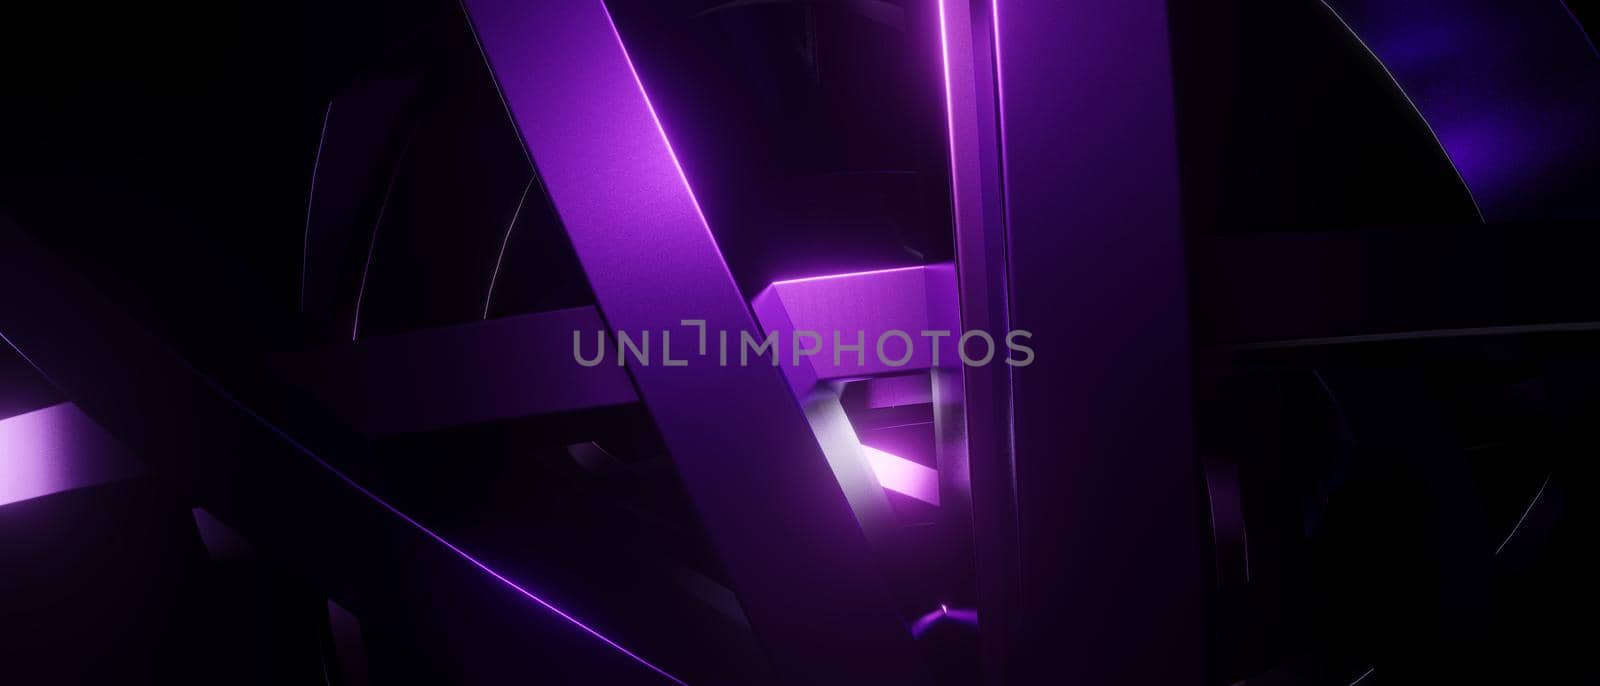 Creative Luxurious Shiny Metallic Serious Violet Abstract Background 3D Rendering by yay_lmrb